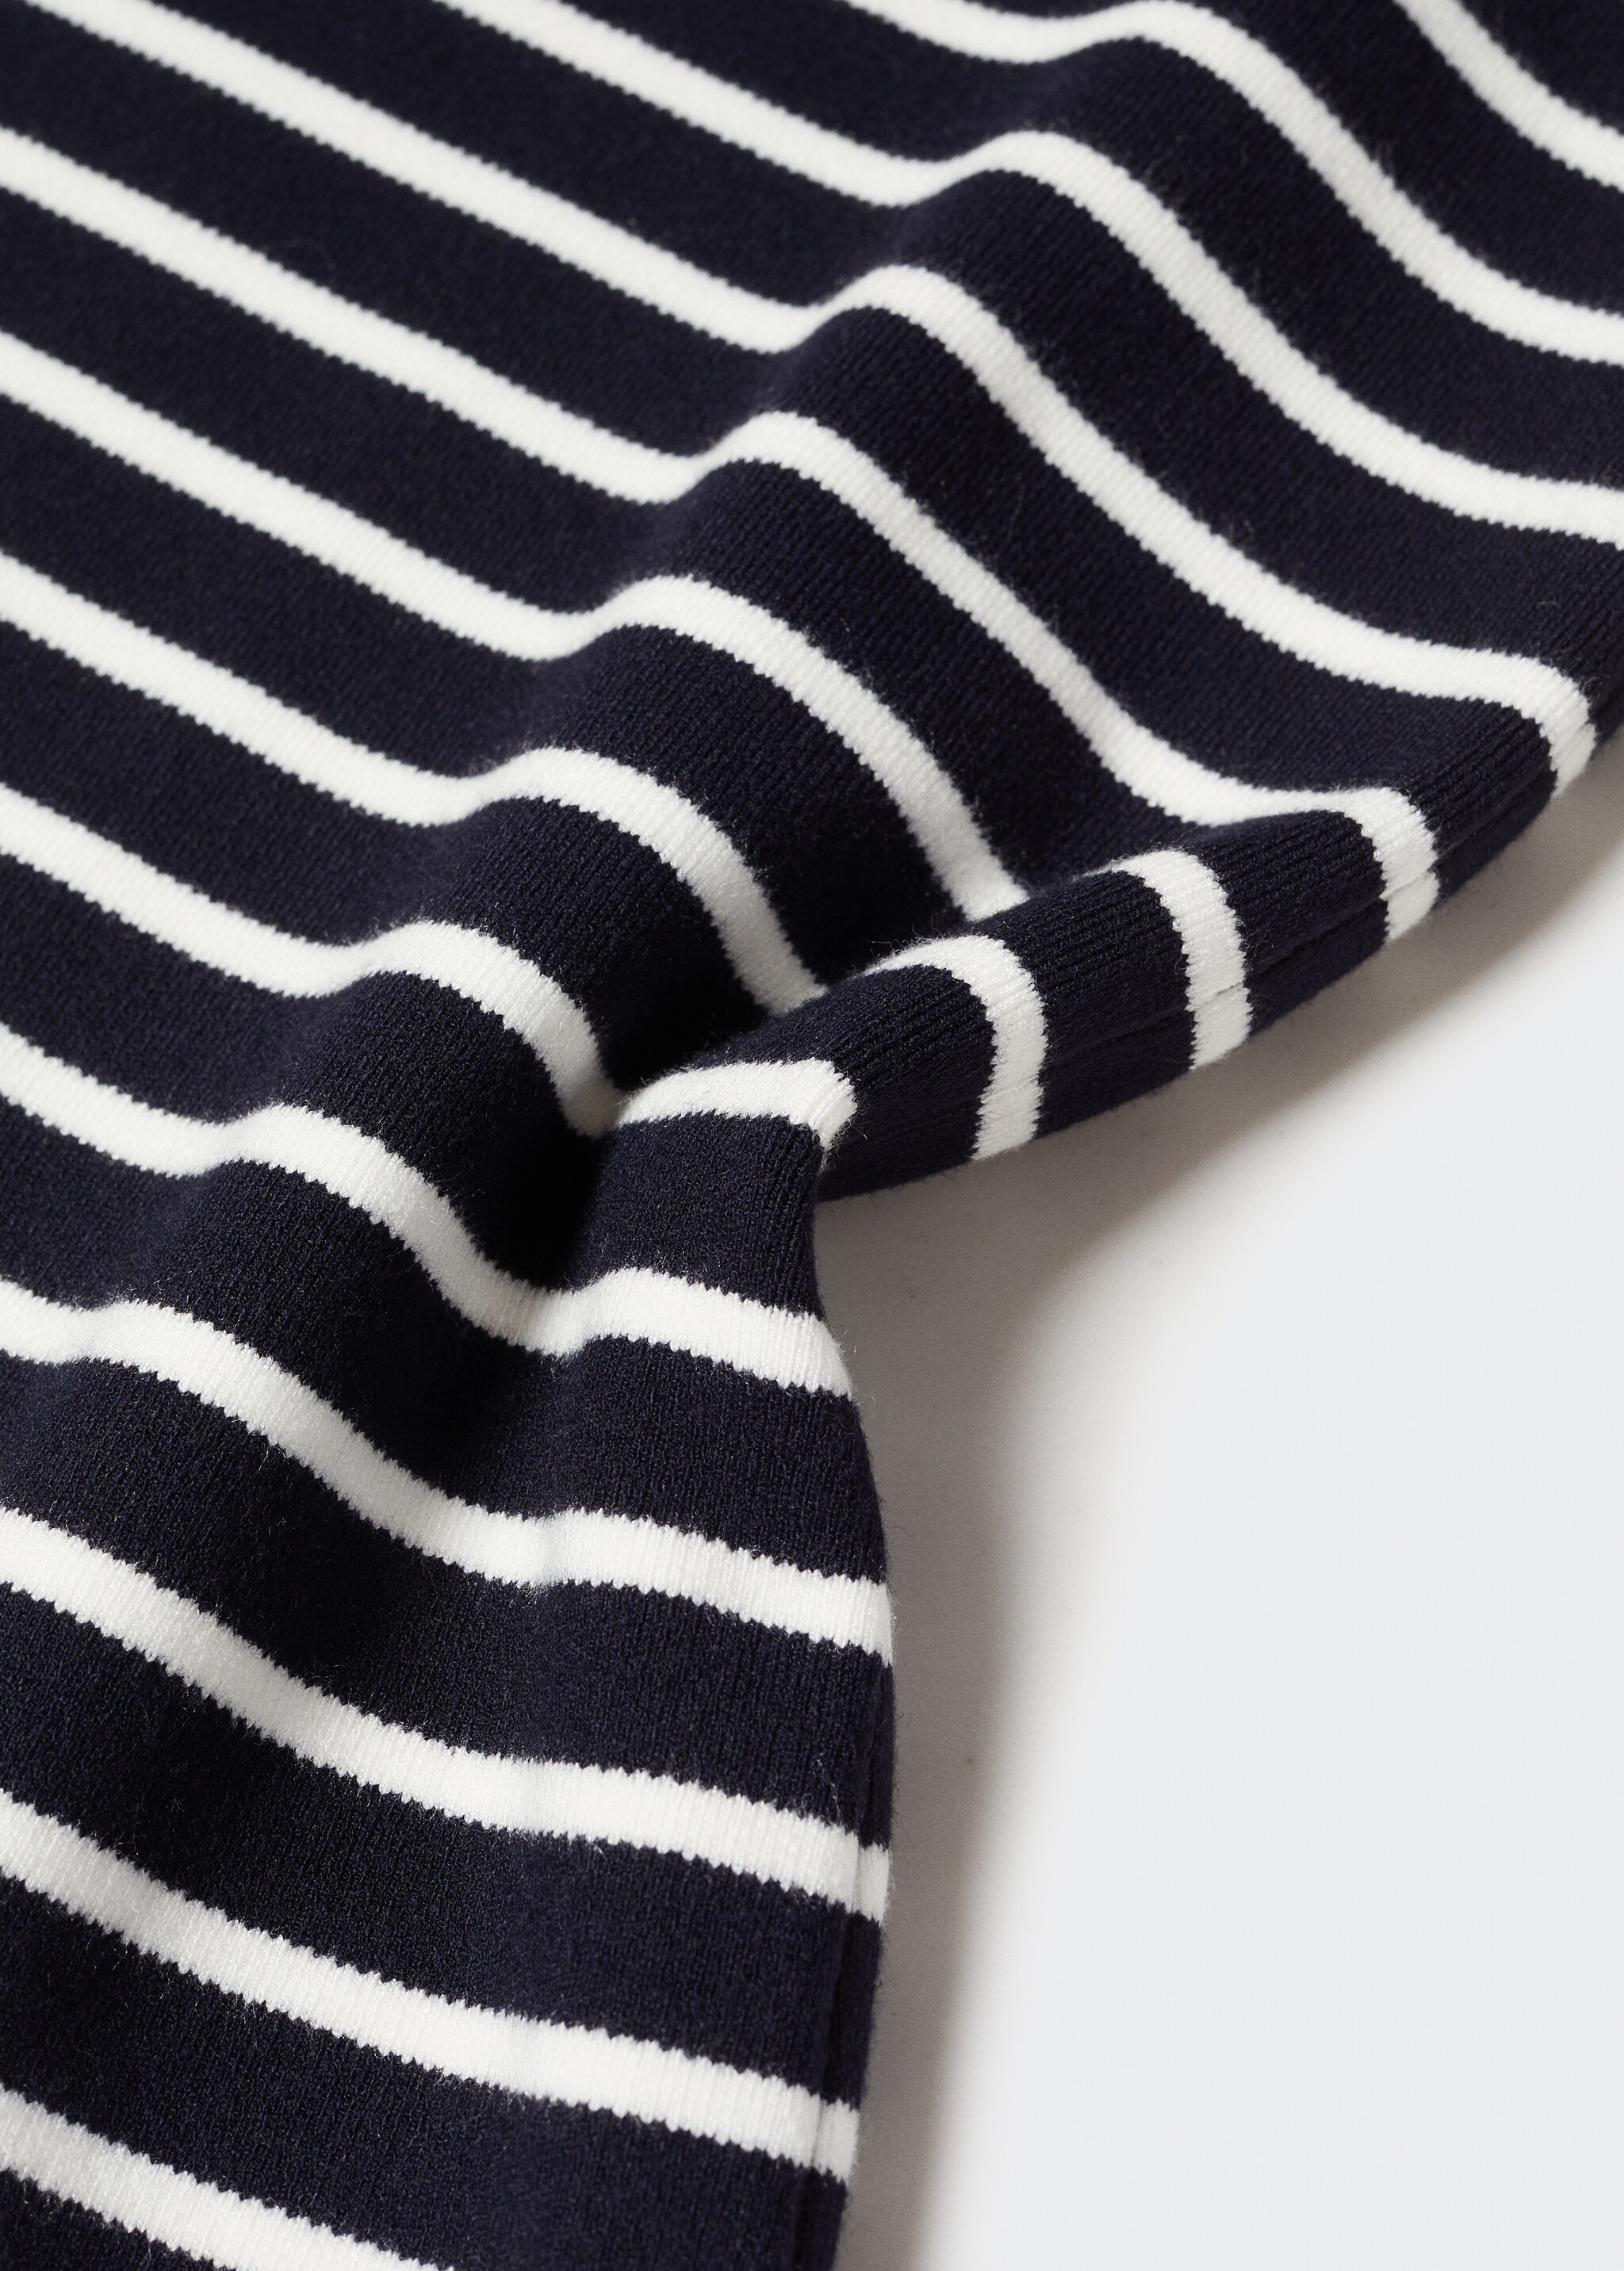 Striped jersey dress - Details of the article 8